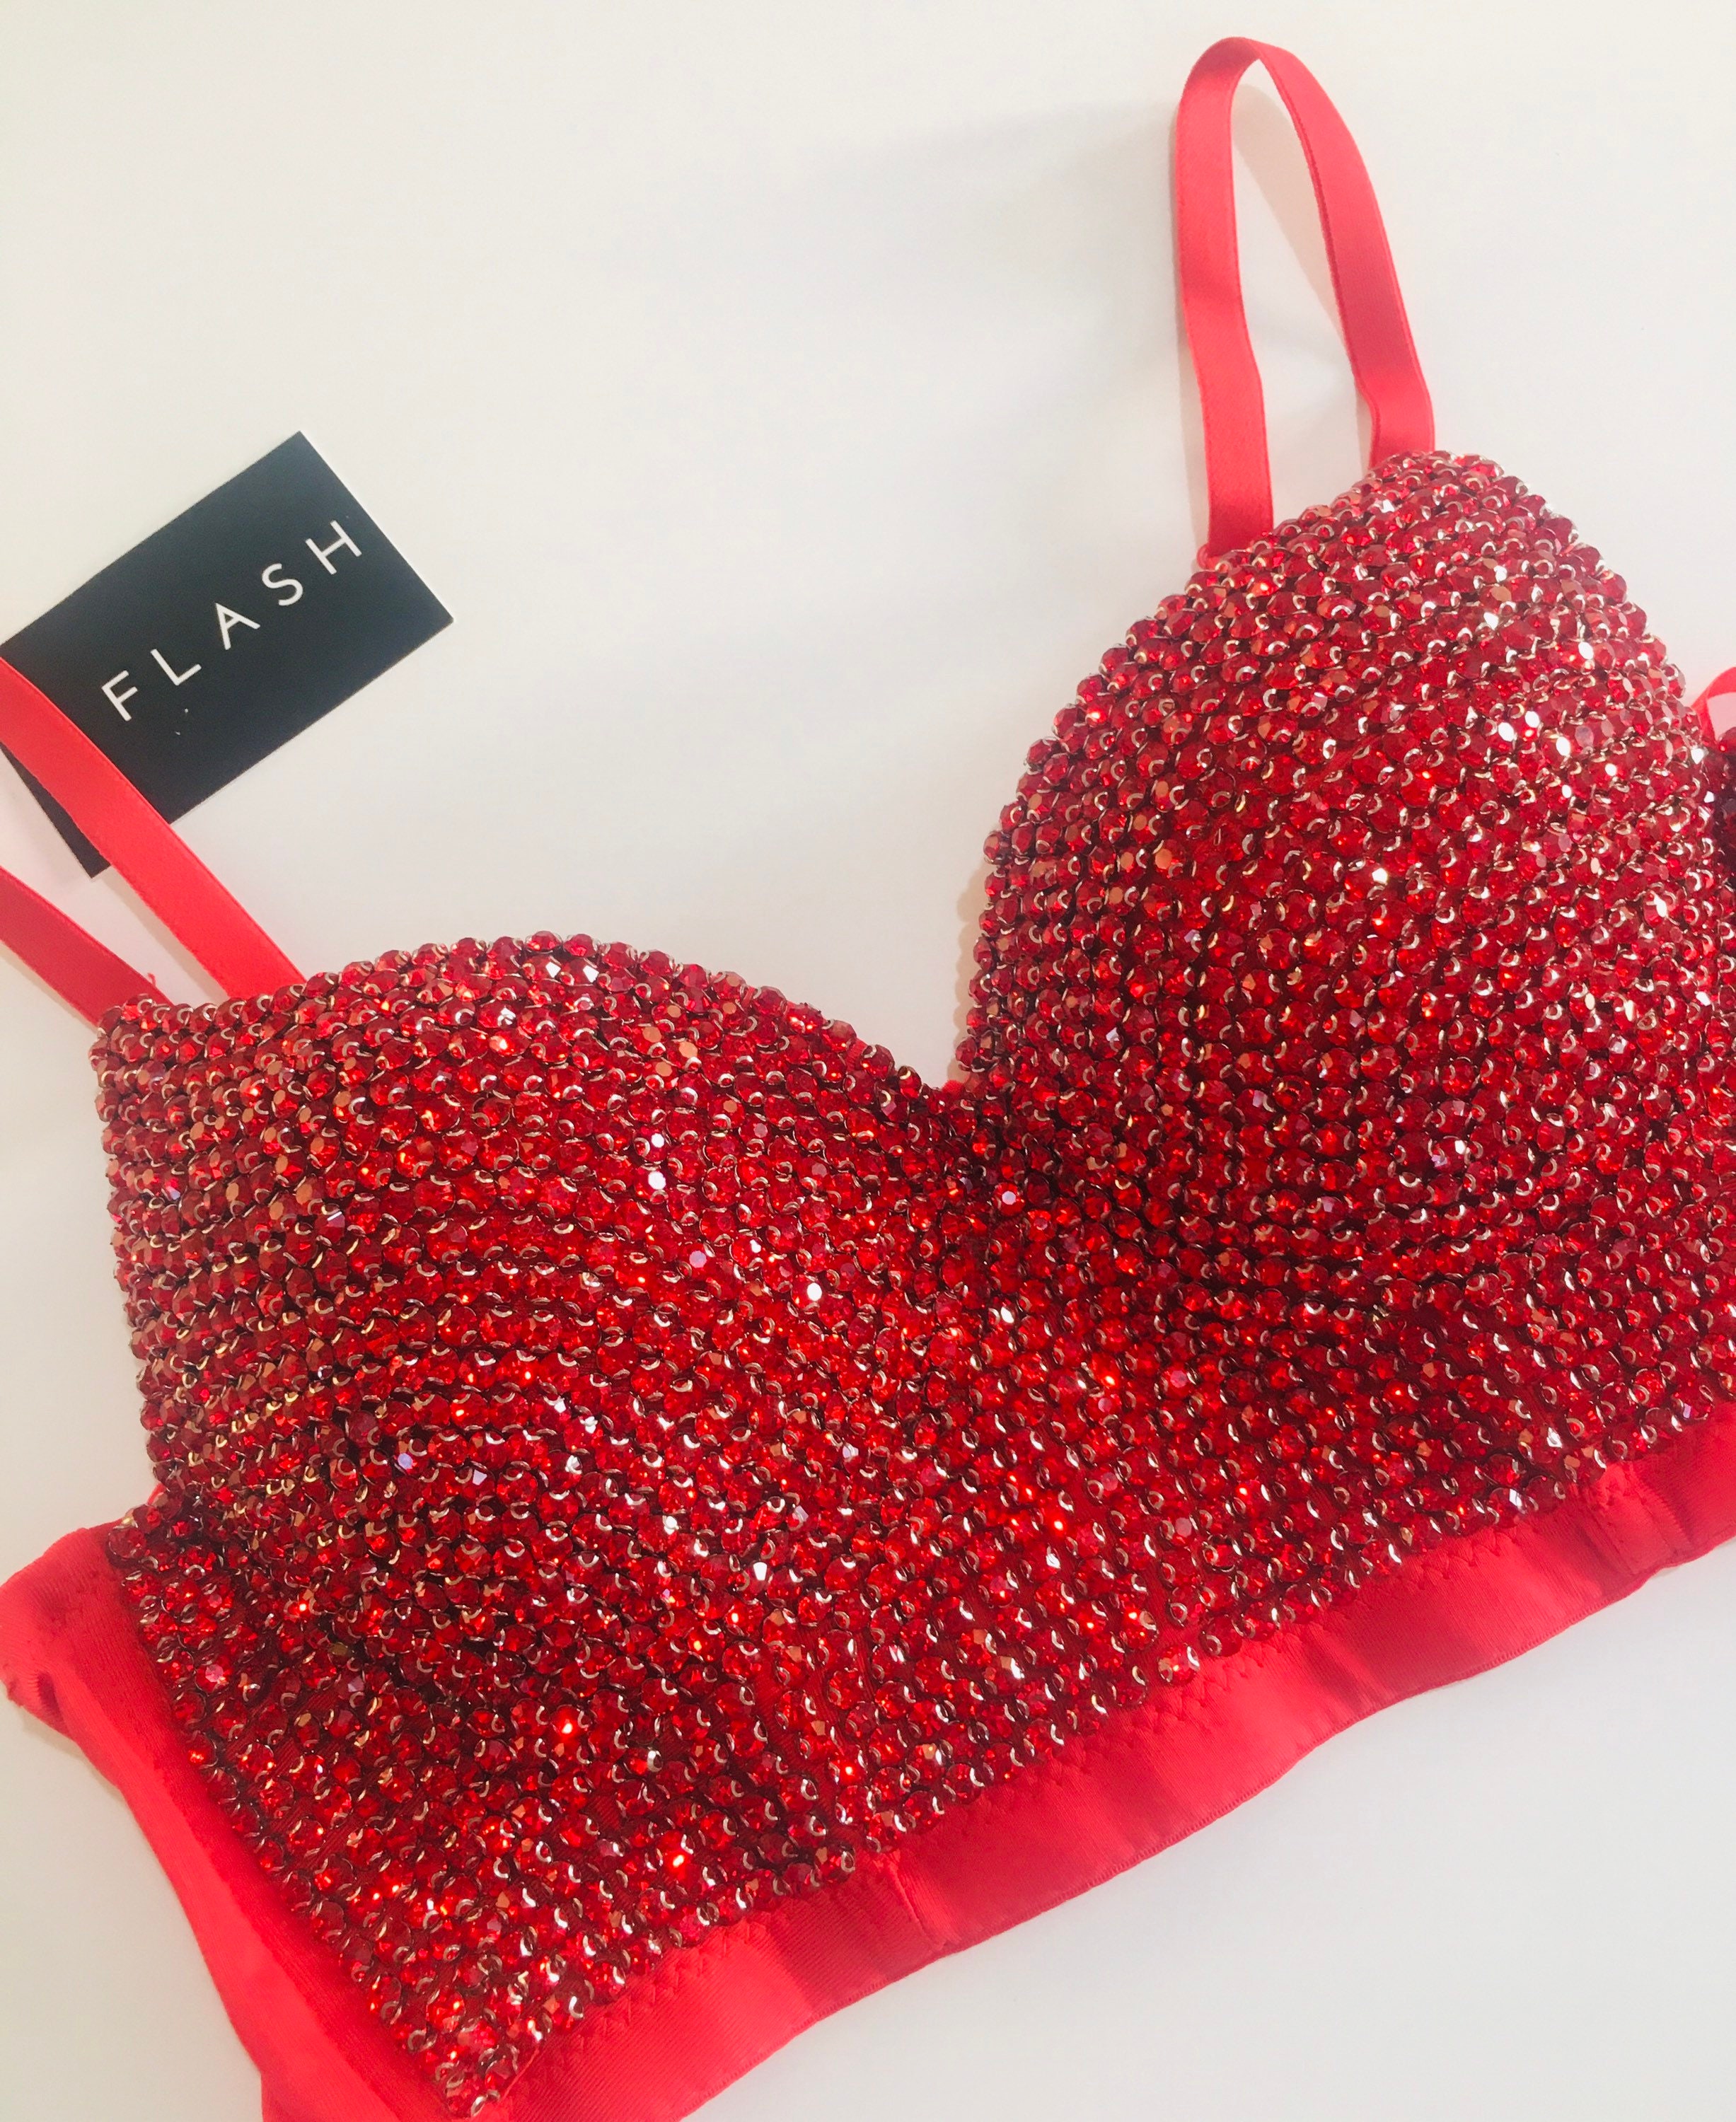 HIGH-END FRENCH “Esme” BRALETTE IN RED - (32C/30D/34B)